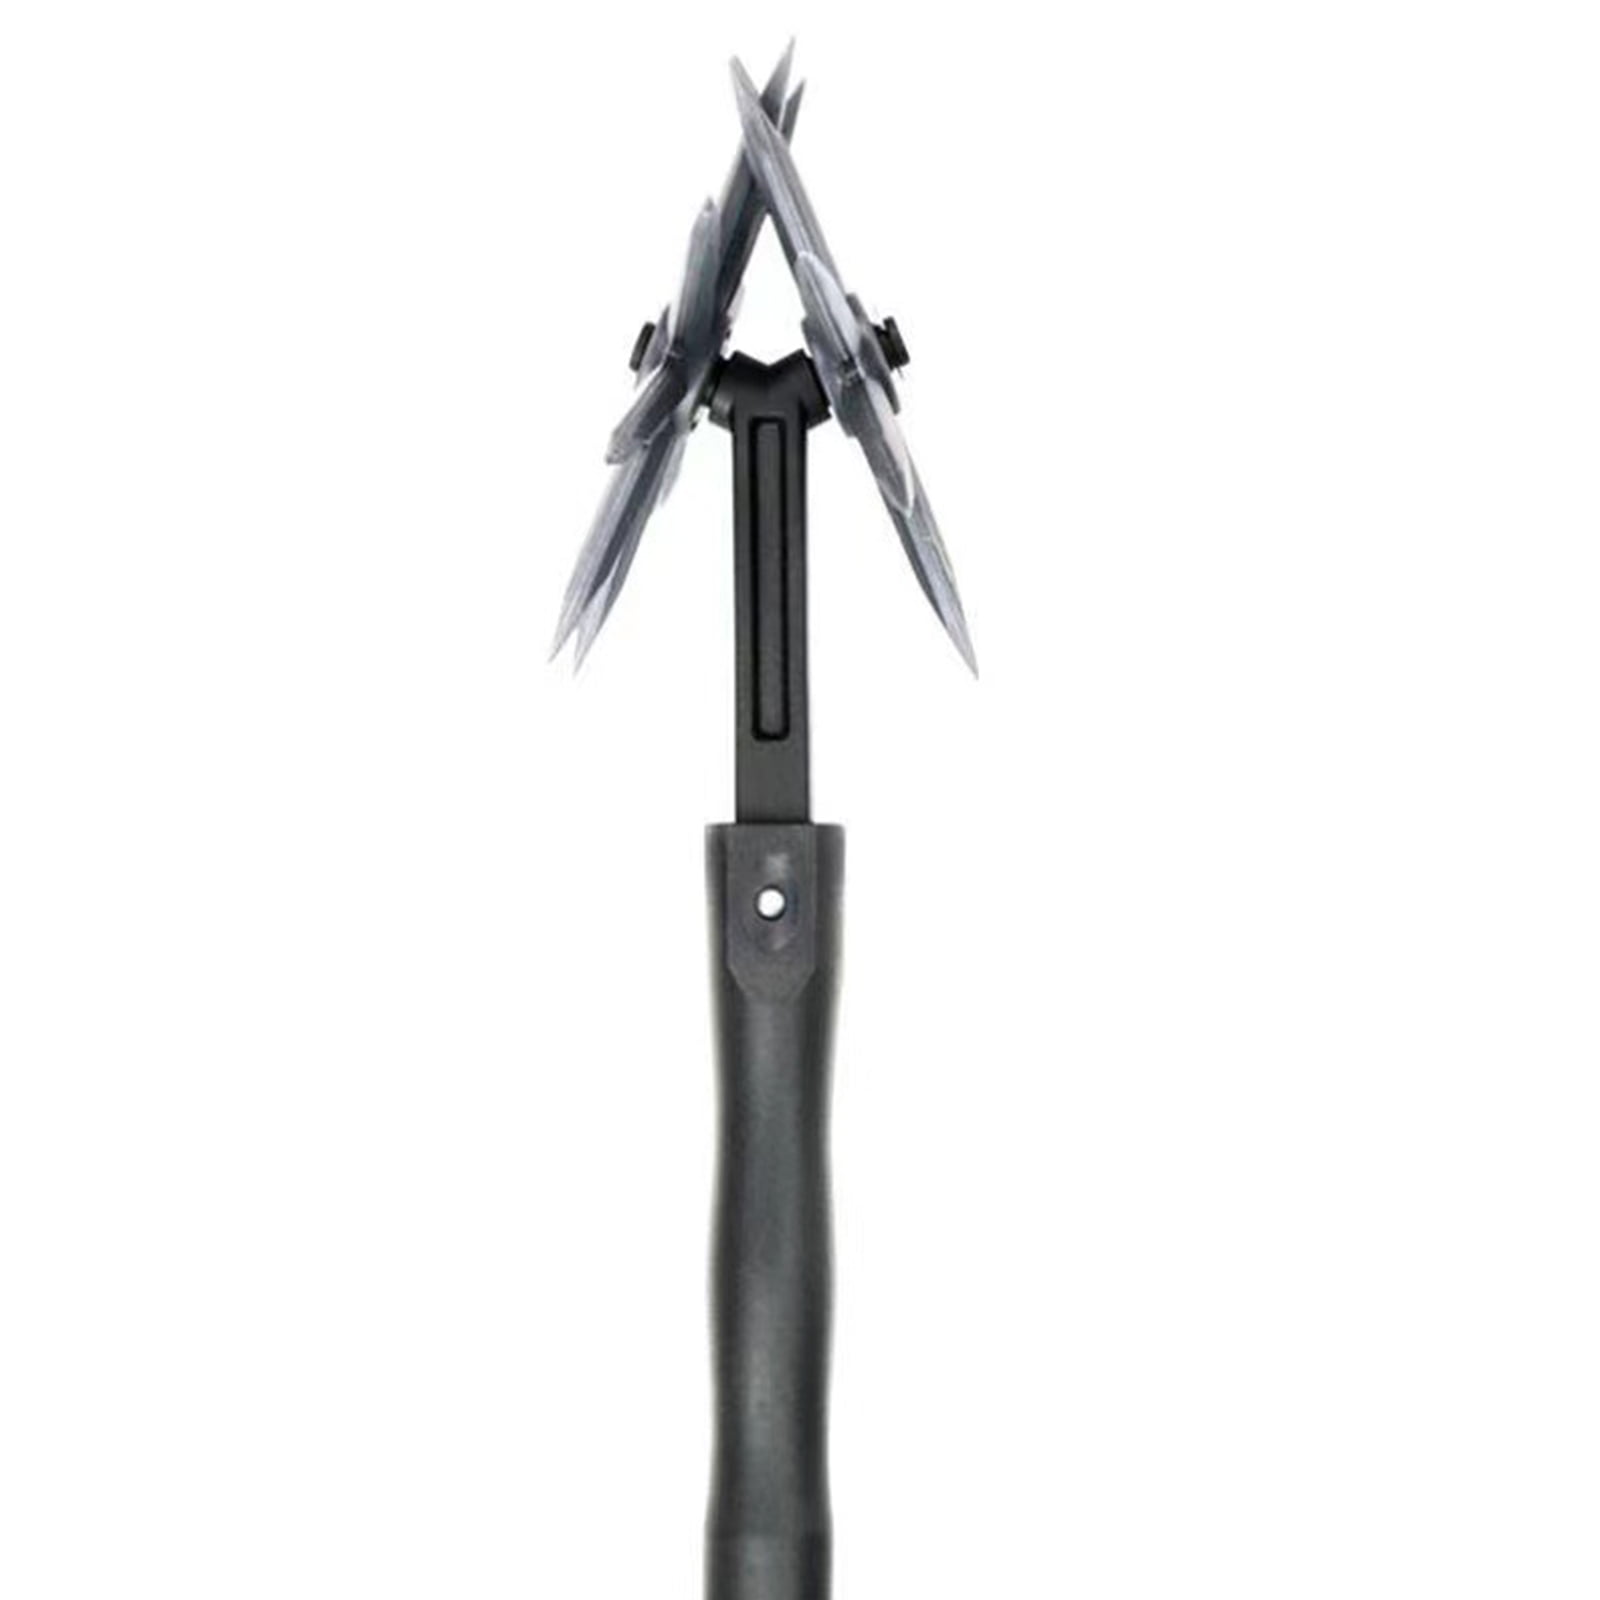 Buy Cultivator Tool,Soil Turning Tool With 3 Roots Reinforced Tines ...